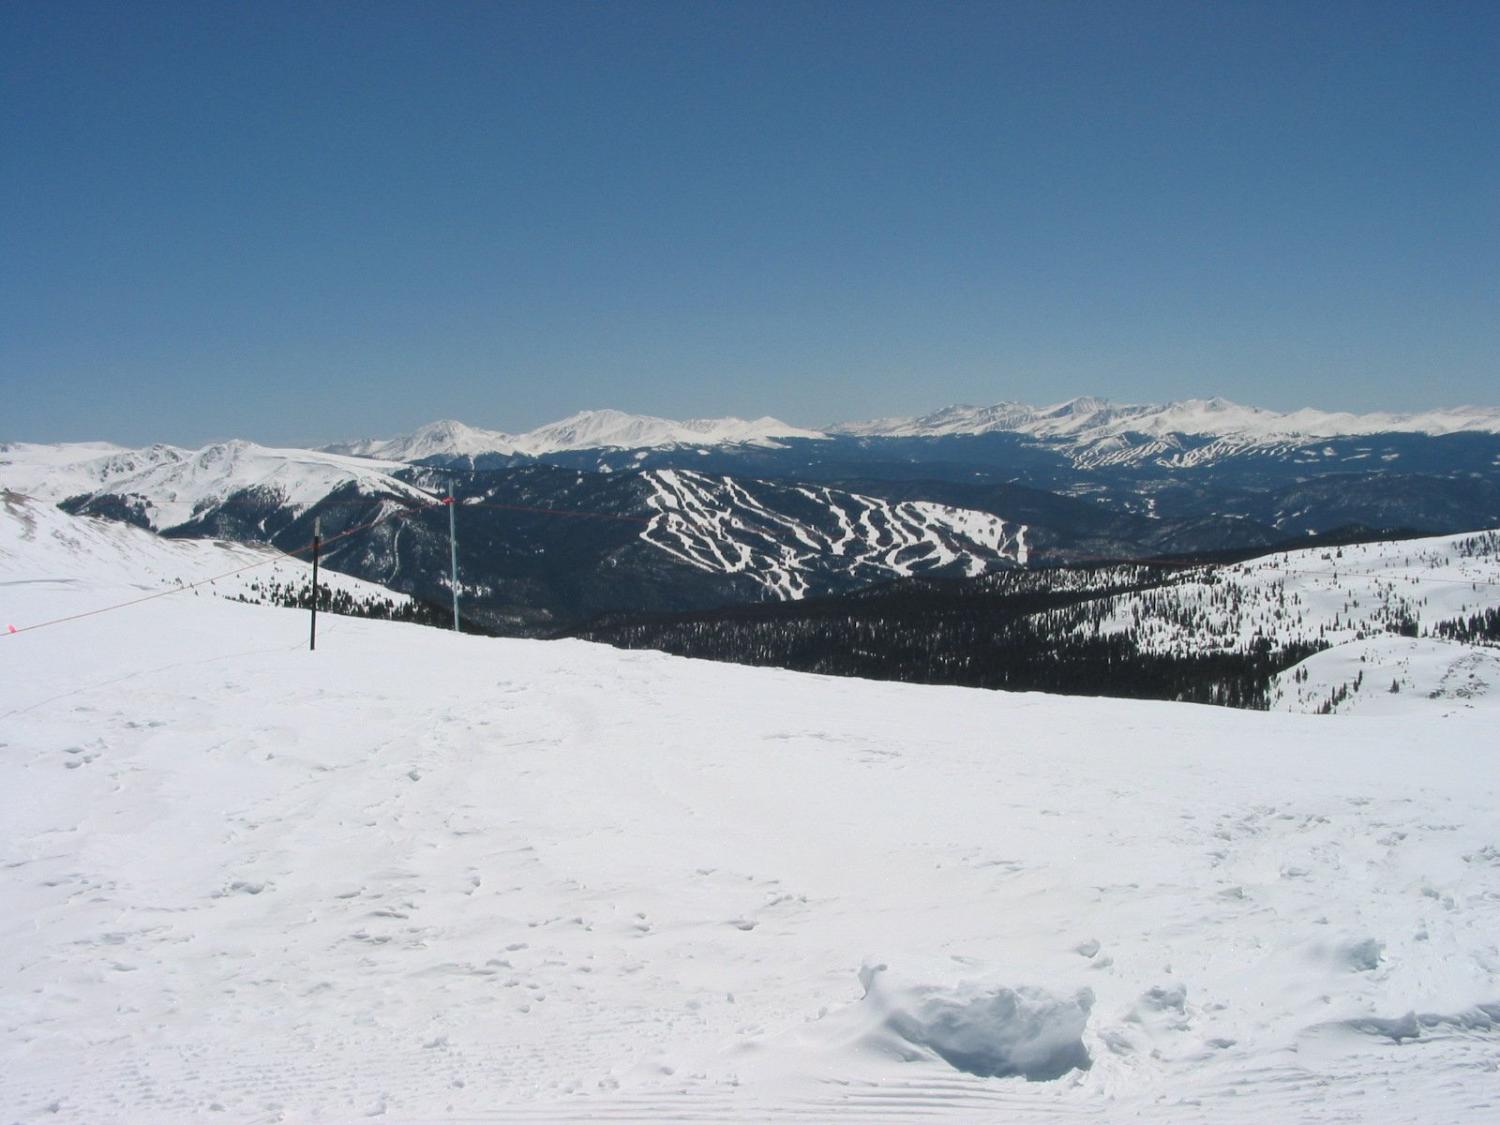 Keystone and Breckenridge from the top of Wild Child